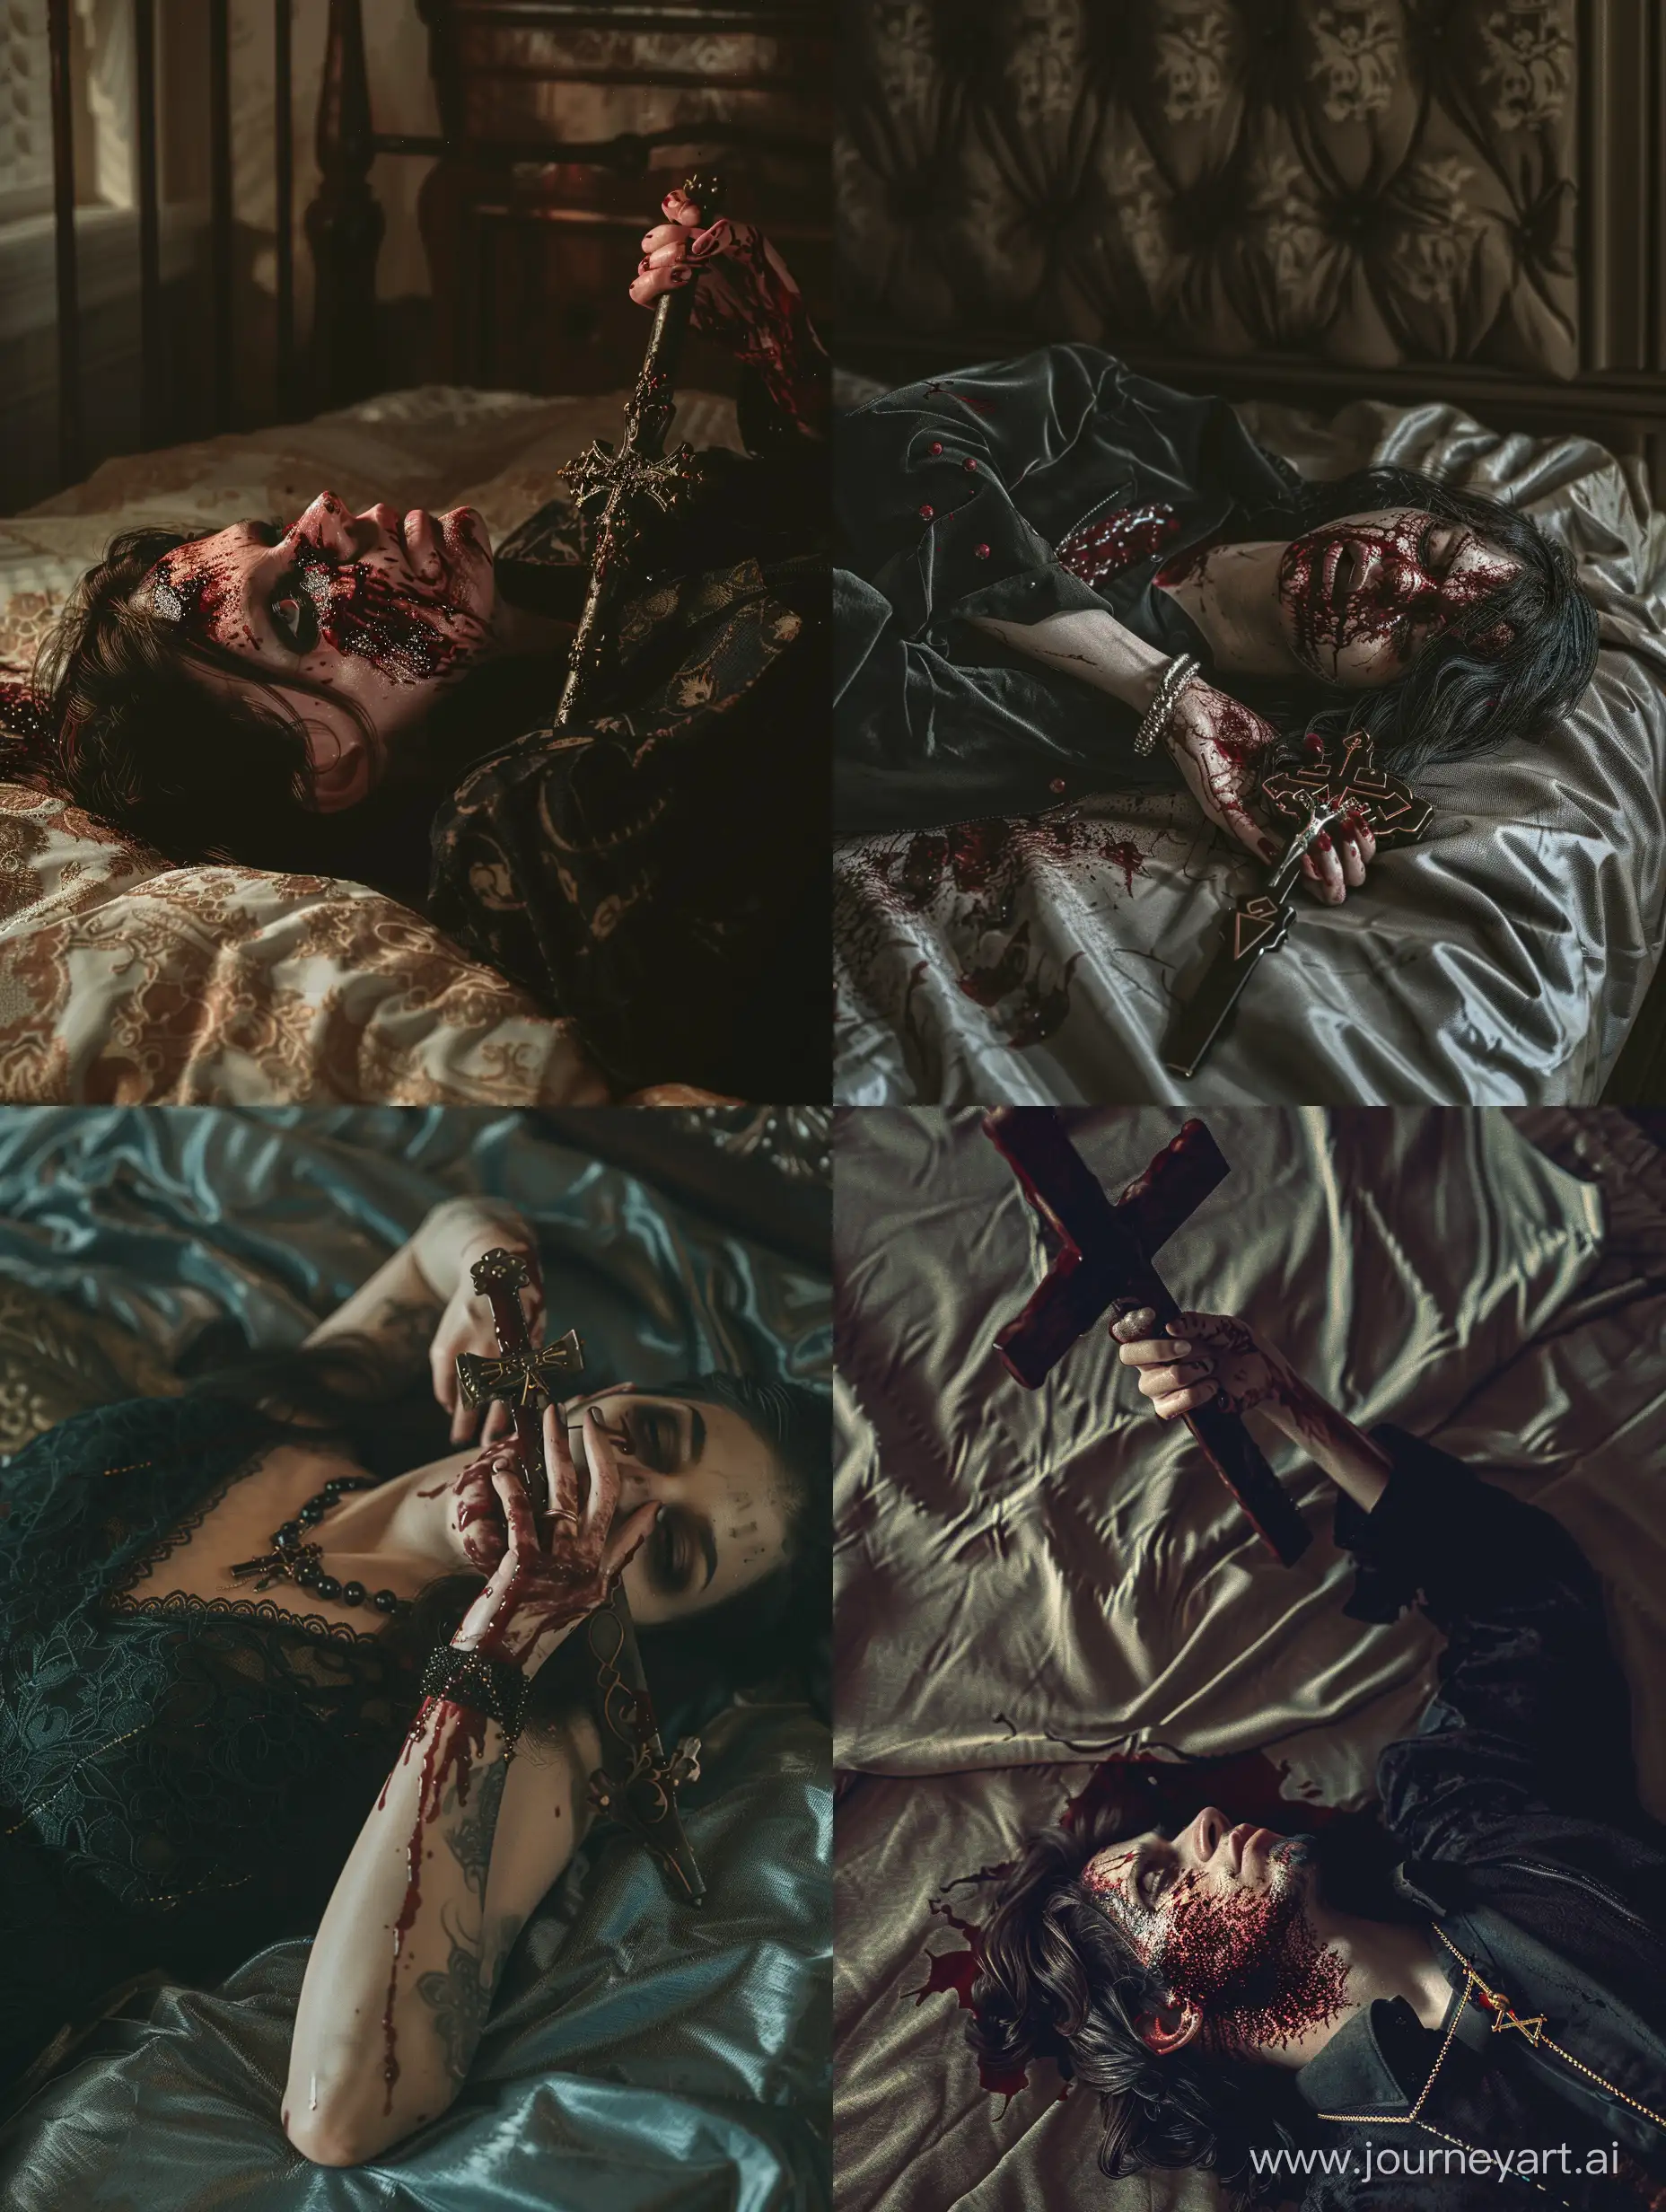 A person lying on a bed with their face covered in blood, holding a cross in their hand, in the style of gothic horror, dark and gloomy atmosphere, realistic and detailed, use of shadows and contrast, dramatic and expressive